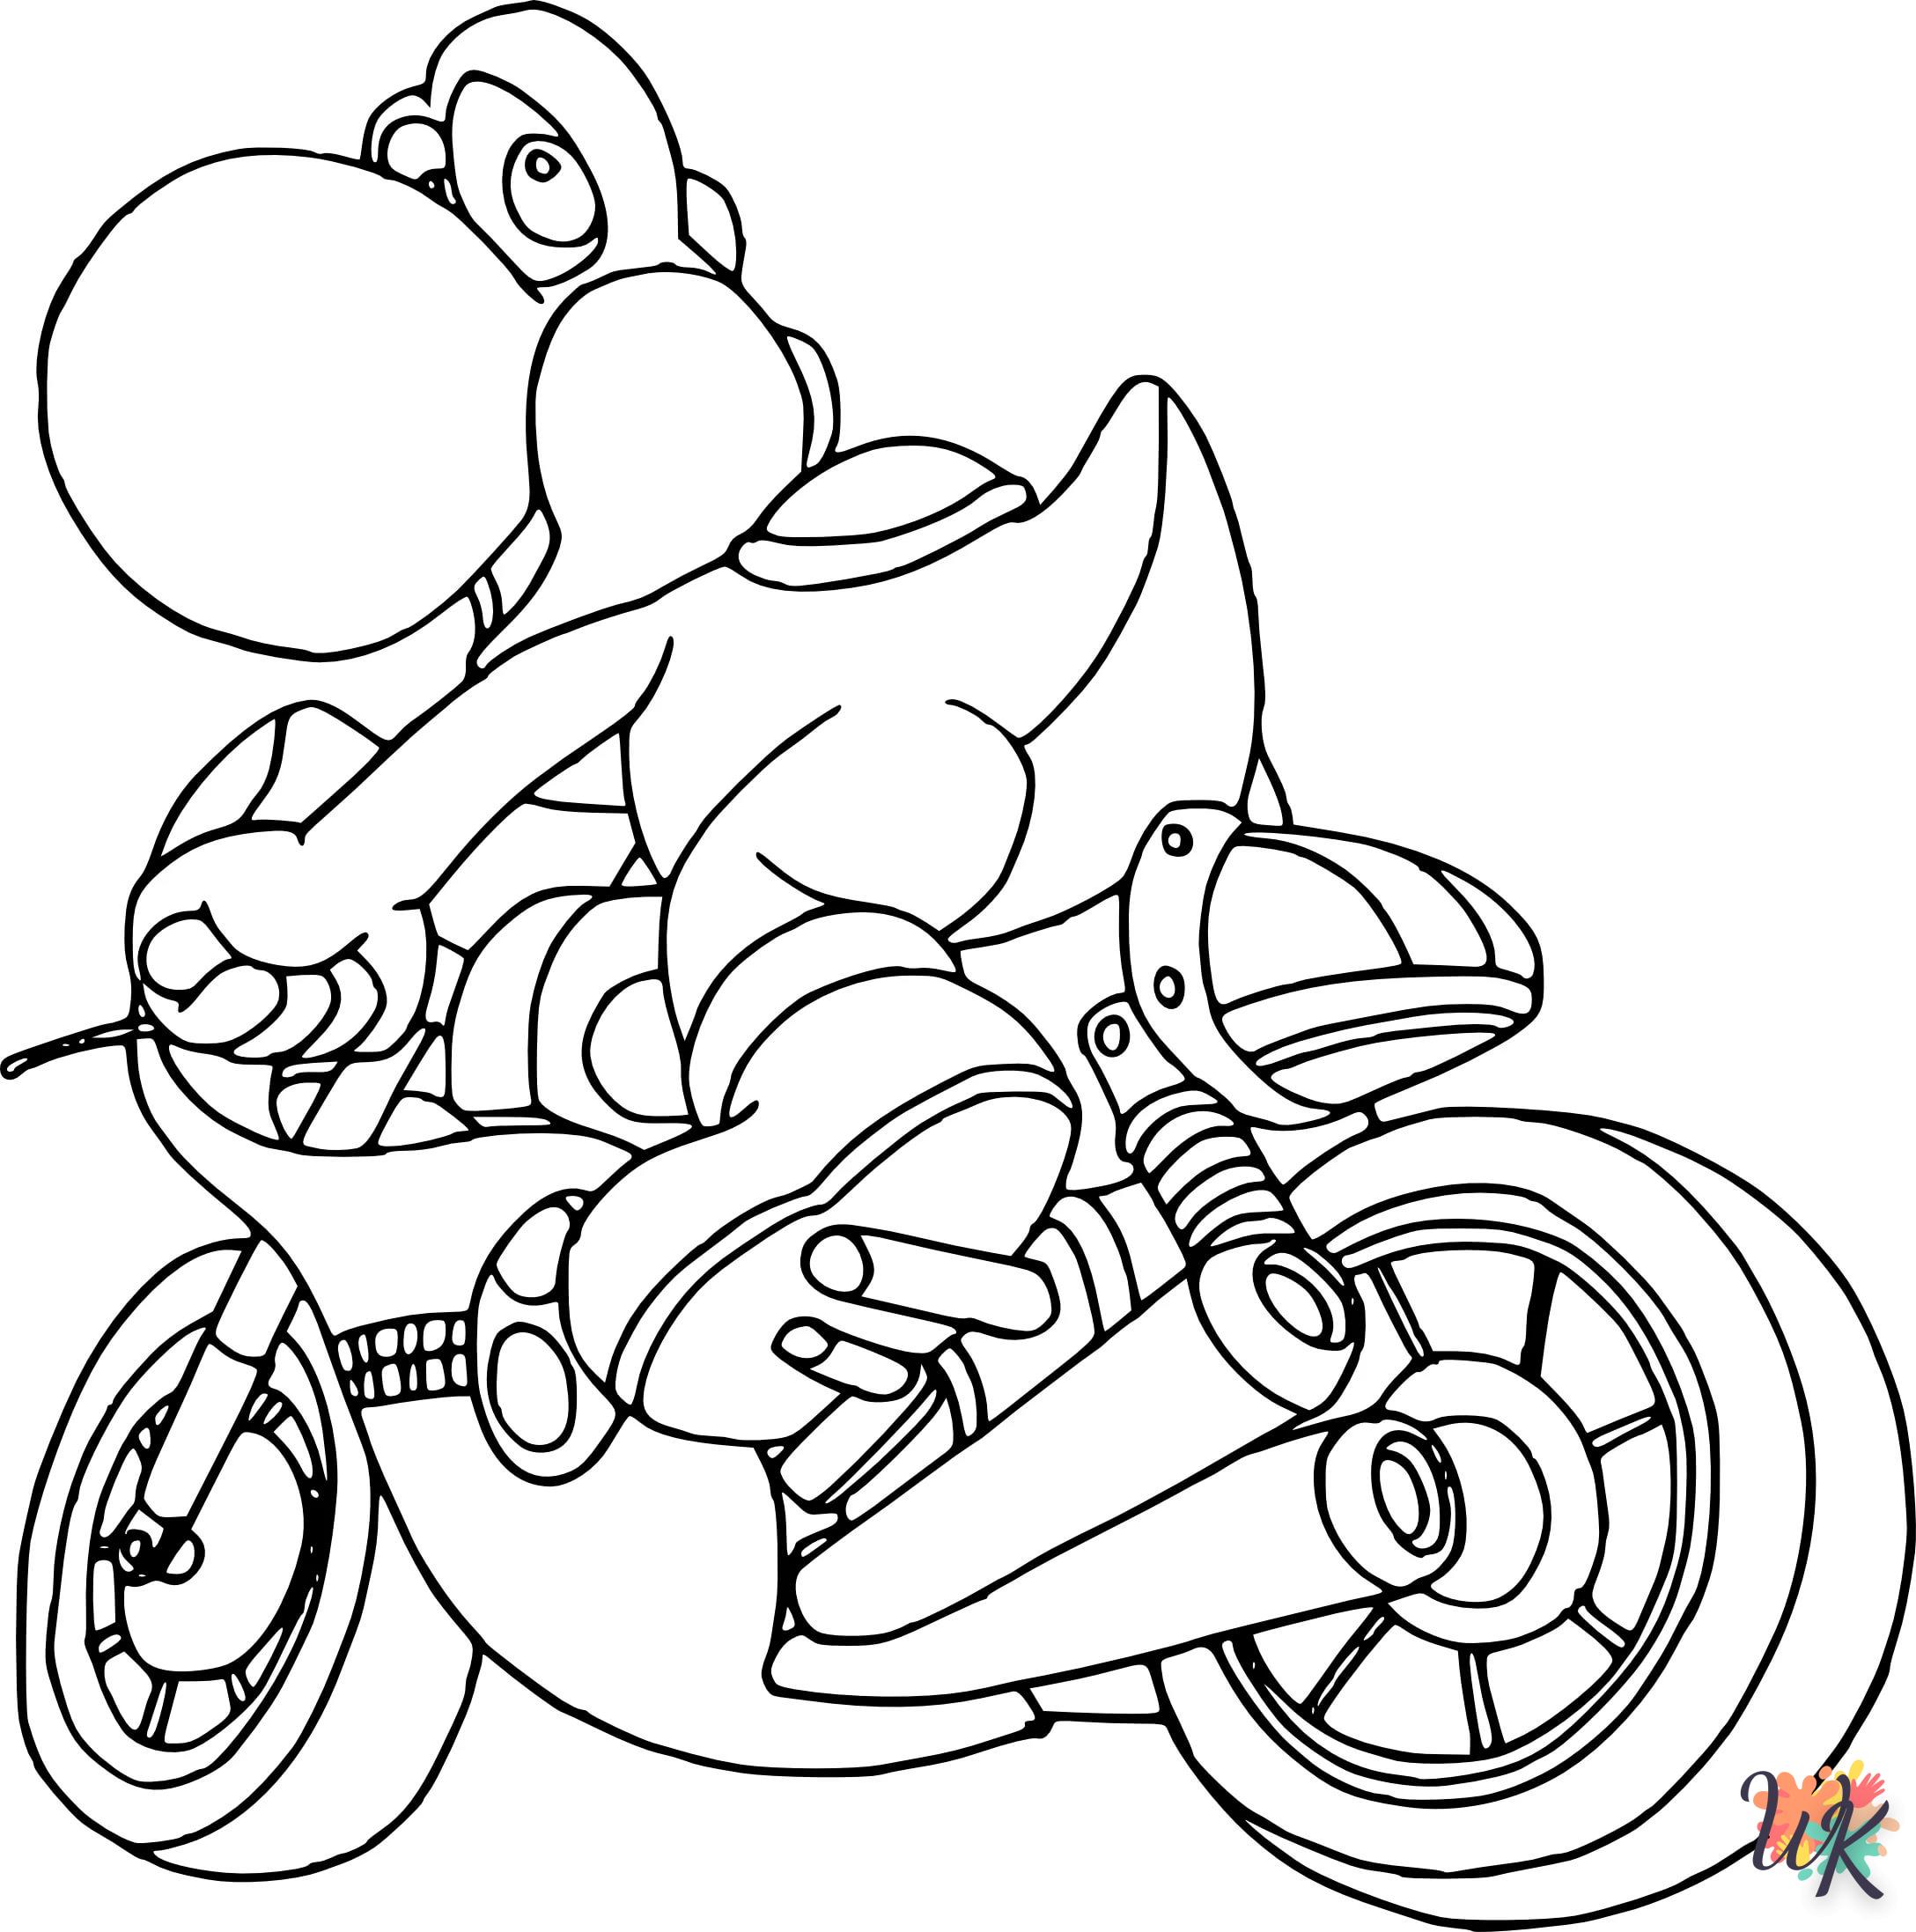 Yoshi coloring  sonic online free to print